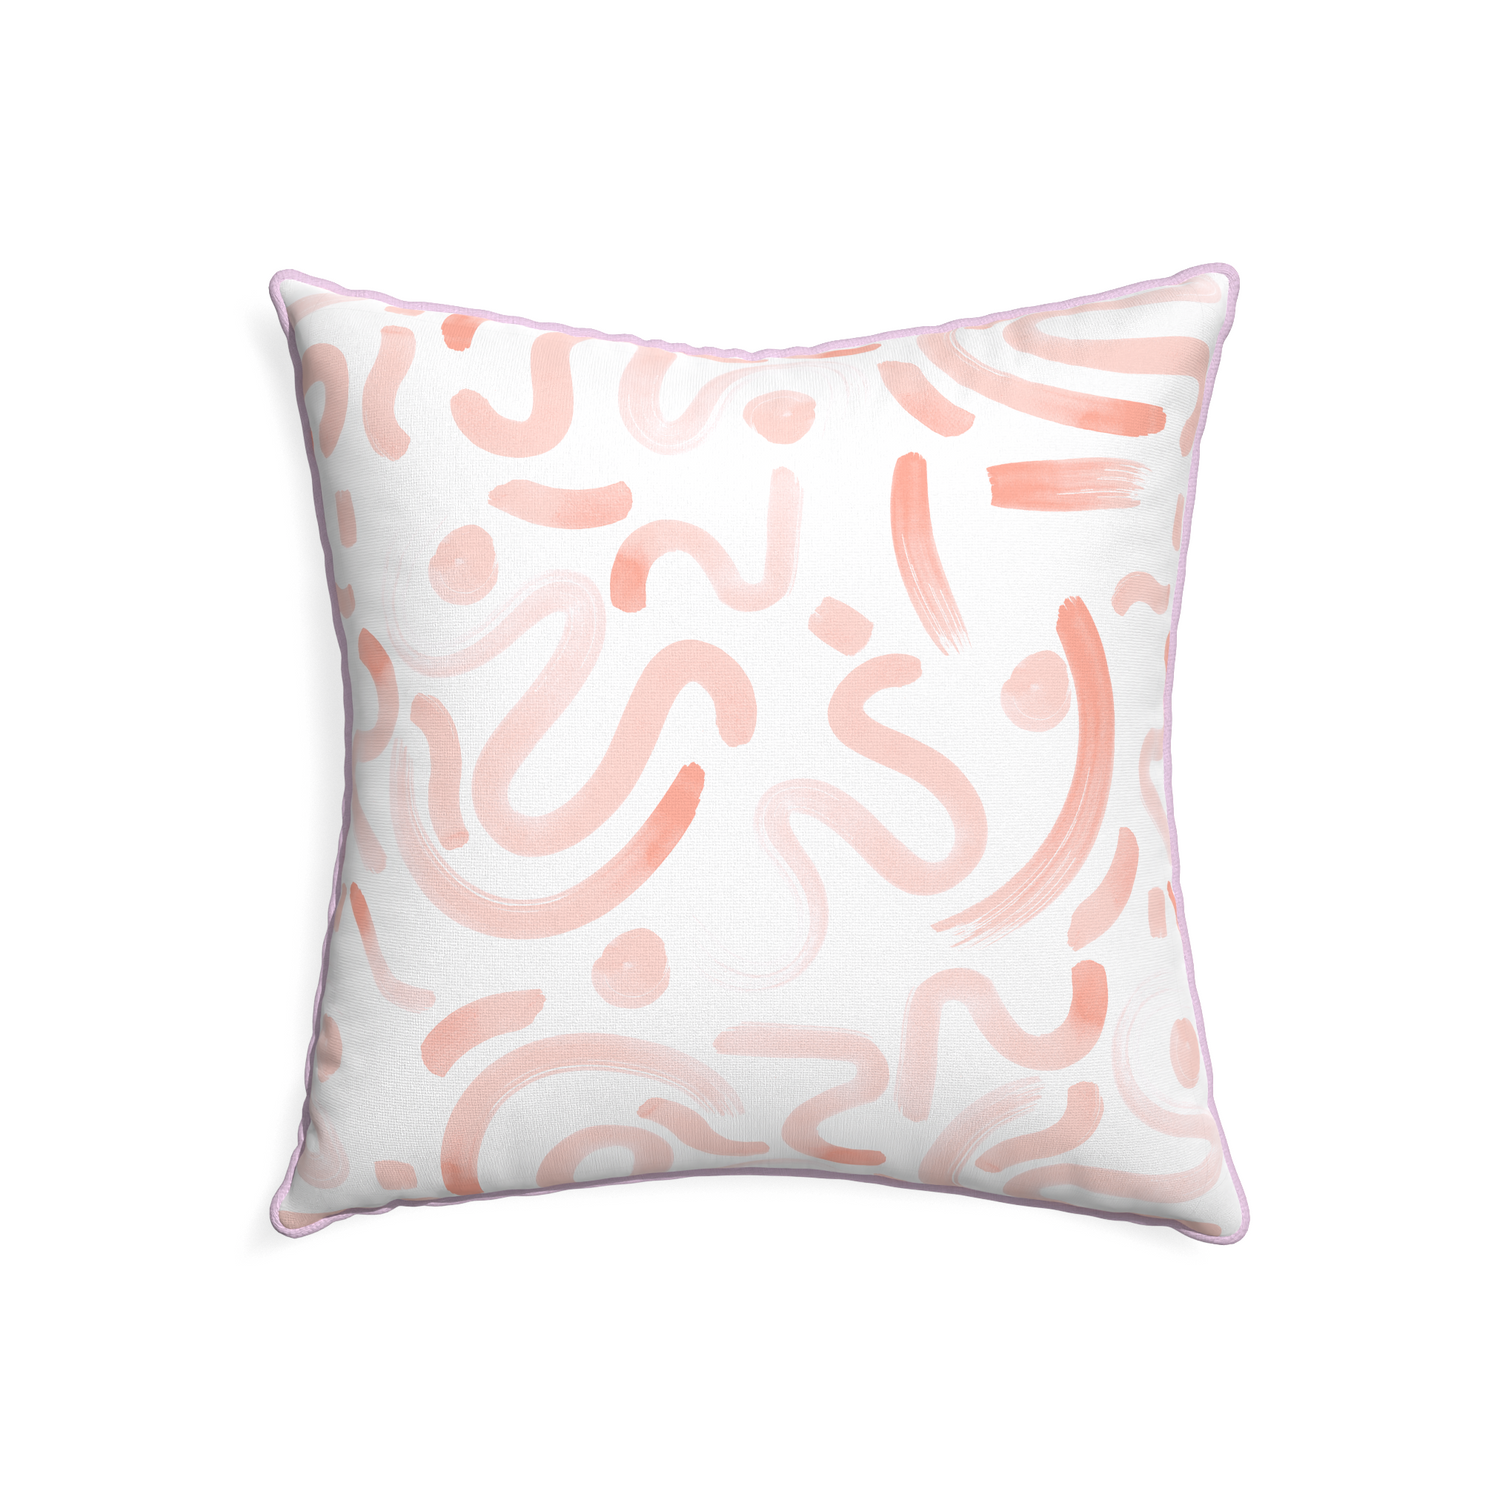 22-square hockney pink custom pink graphicpillow with l piping on white background